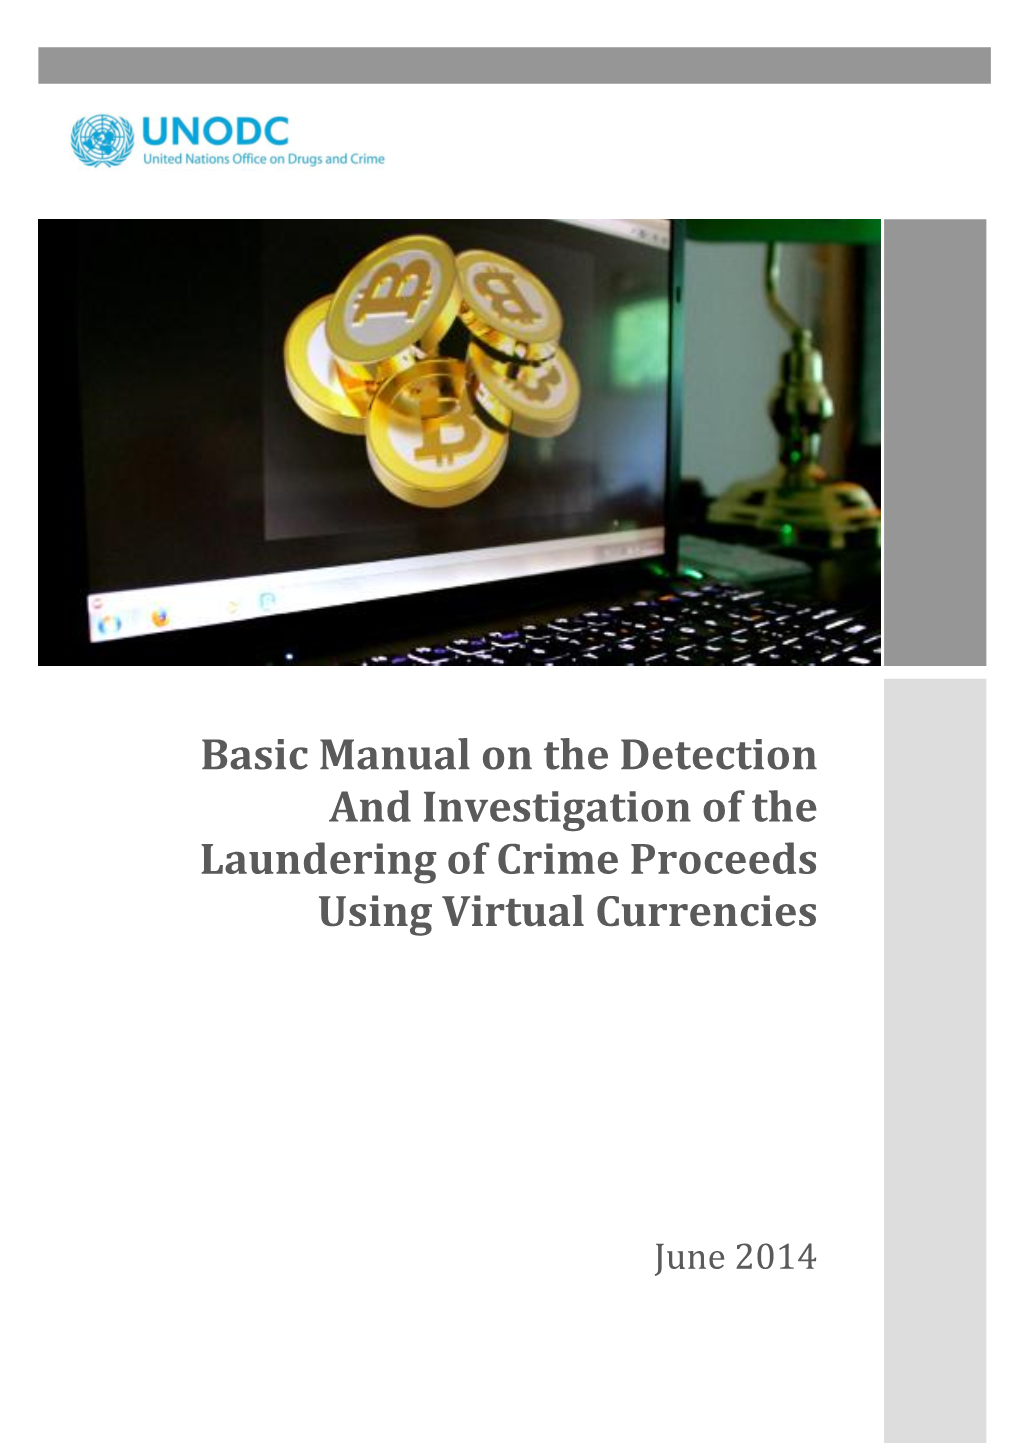 Basic Manual on the Detection and Investigation of the Laundering of Crime Proceeds Using Virtual Currencies